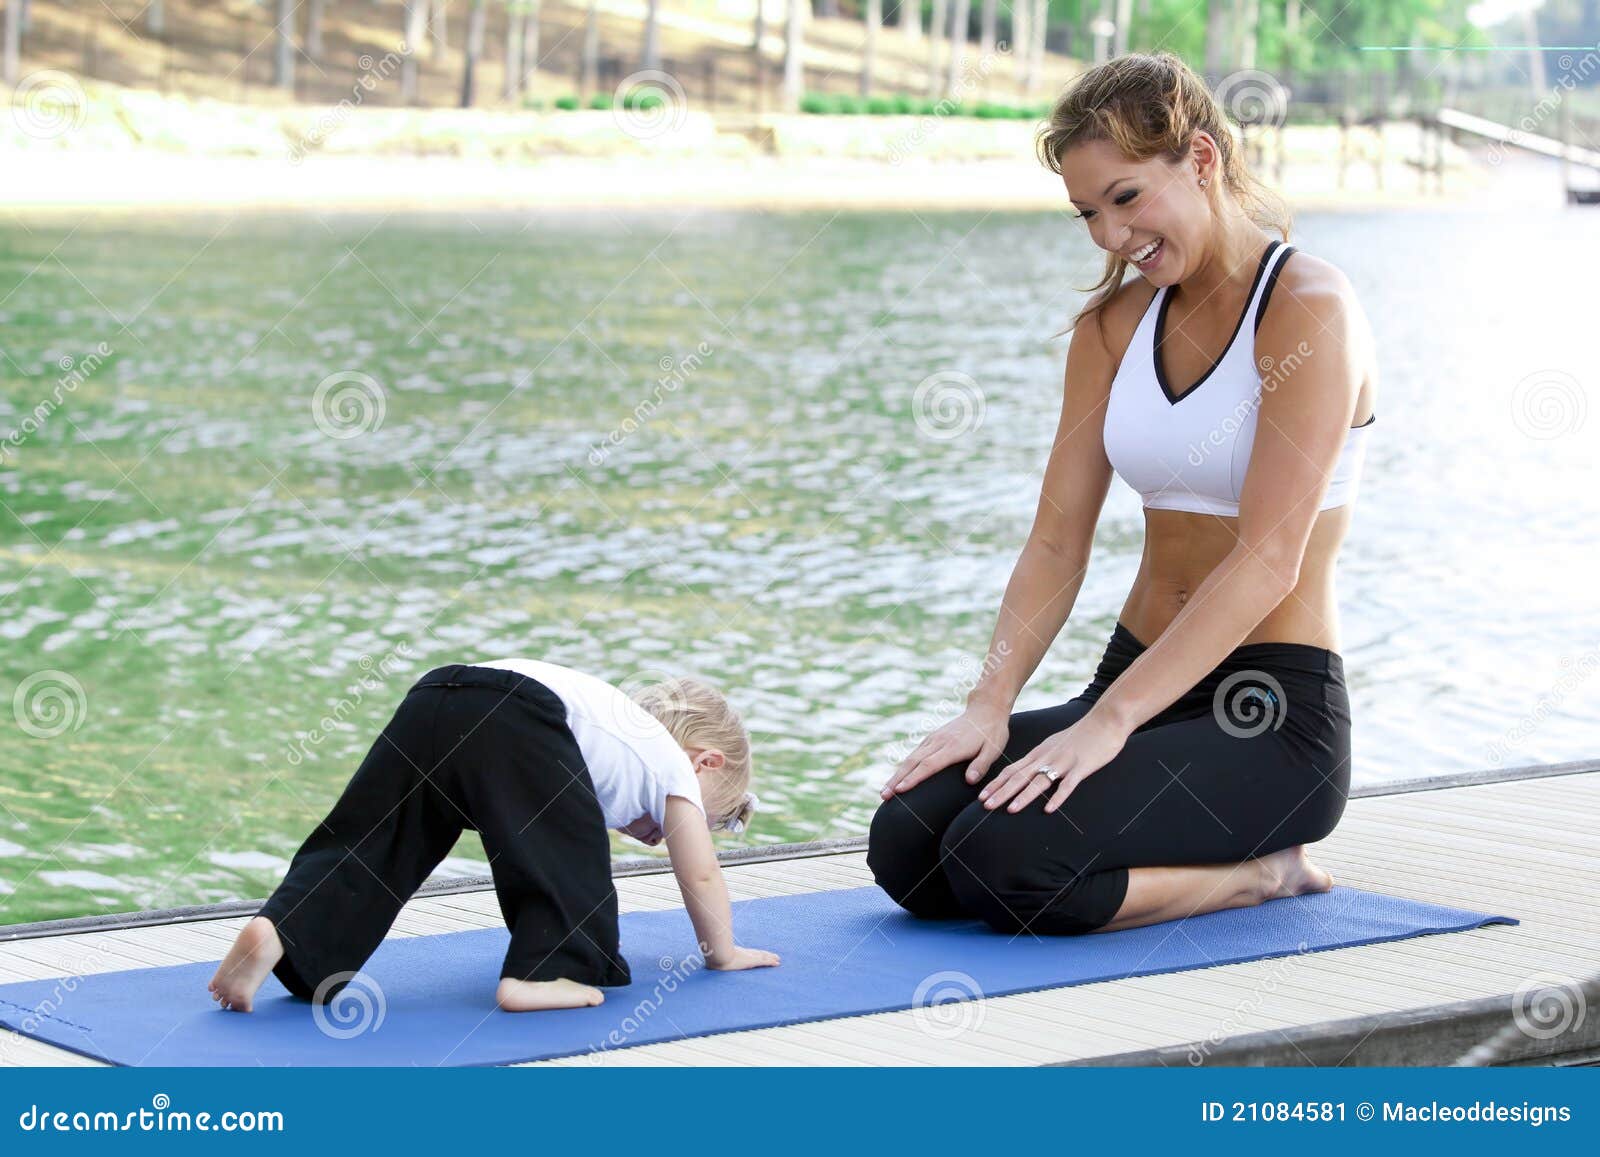 Mommy Daughter Yoga Stock Image Image 21084581